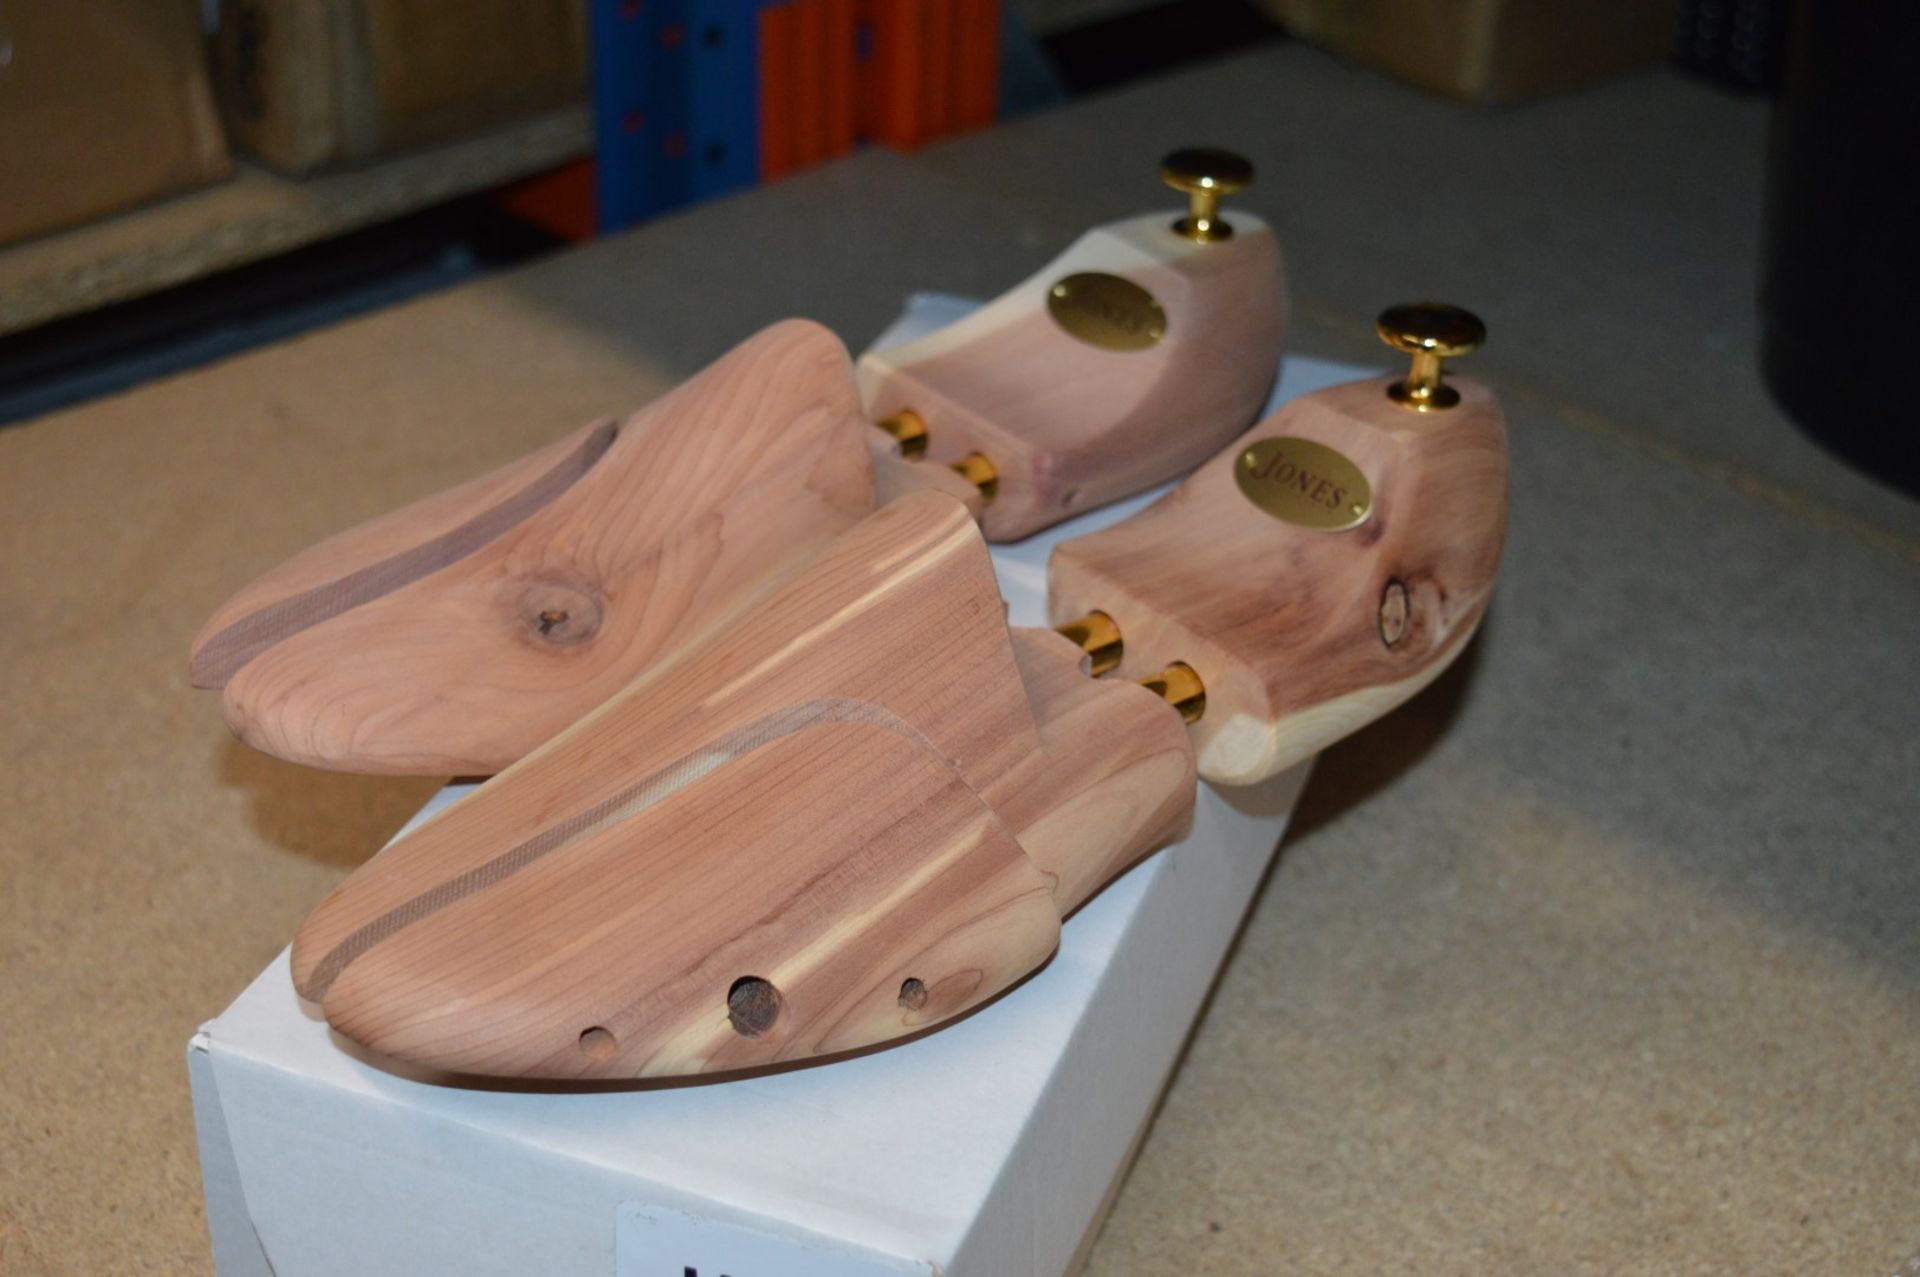 1 x Jones Bootmaker Albany Ladies Wooden Shoe Shaper - Size 7 - New and Boxed - CL285 - Ref - Image 3 of 4